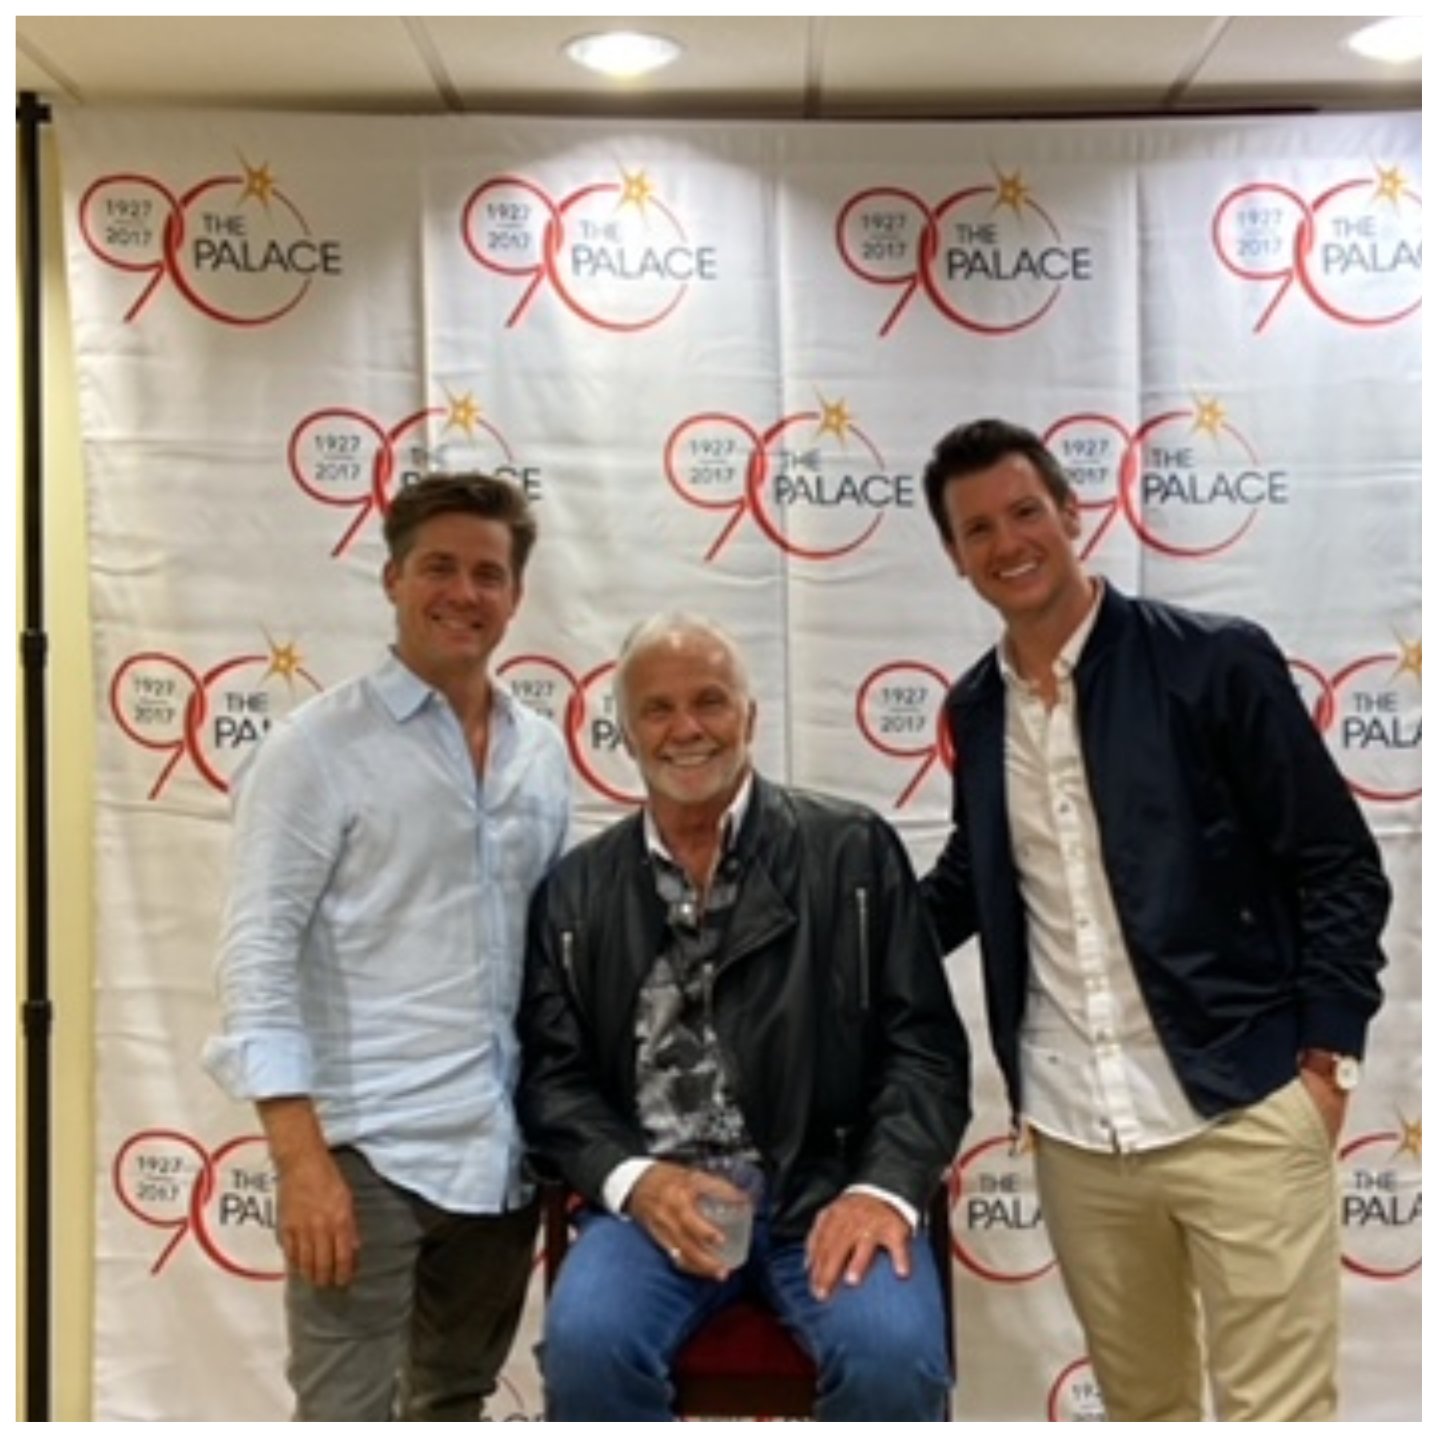 Eddie Lucas, Captain Lee Rosbach, and Colin Macy-O'Toole from 'Below Deck' gather together for a photo